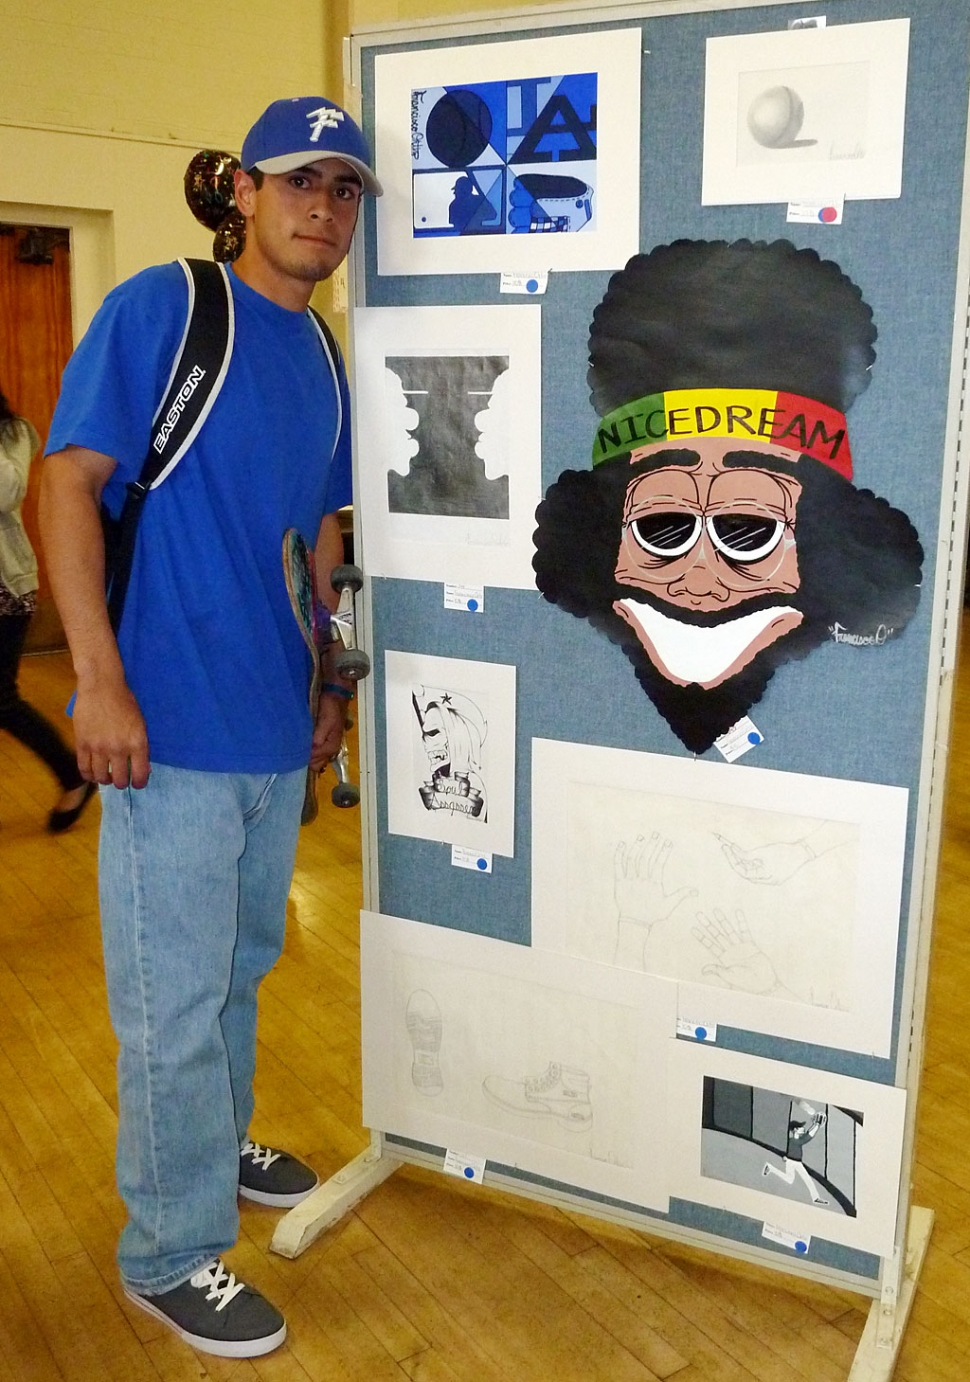 Francisco Ortiz, a Junior at FHS, is very proud of his awesome art work on display at the Art Show.